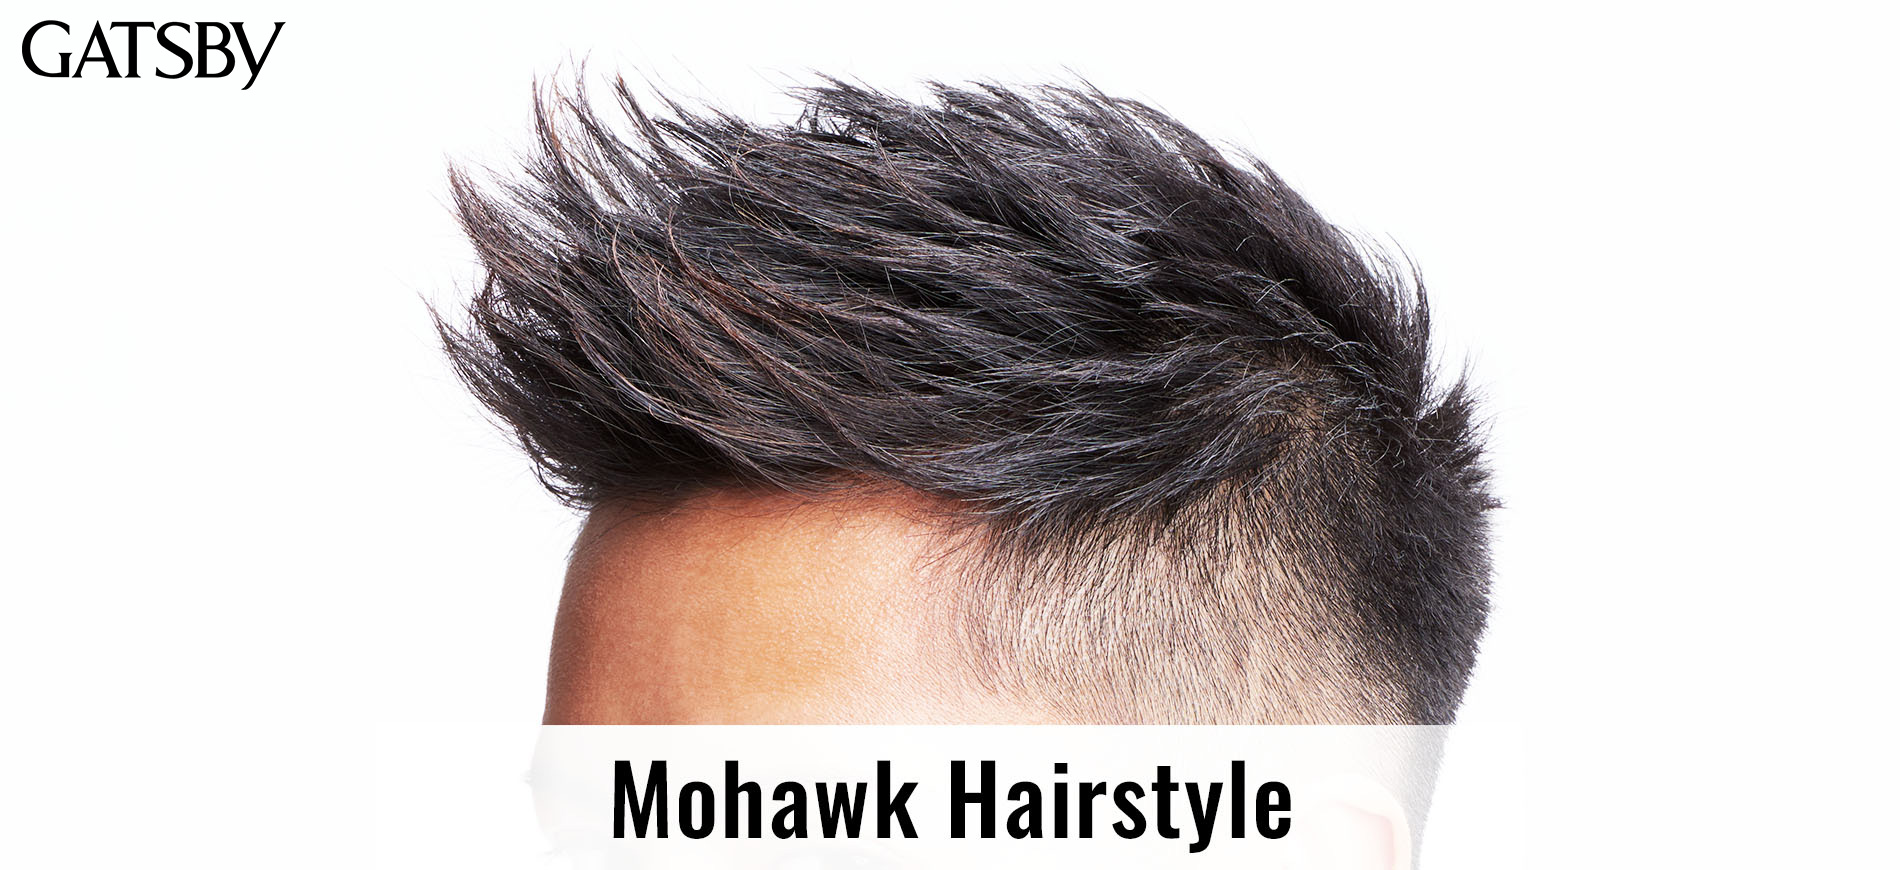 Behold the Mohawk! What Is It?